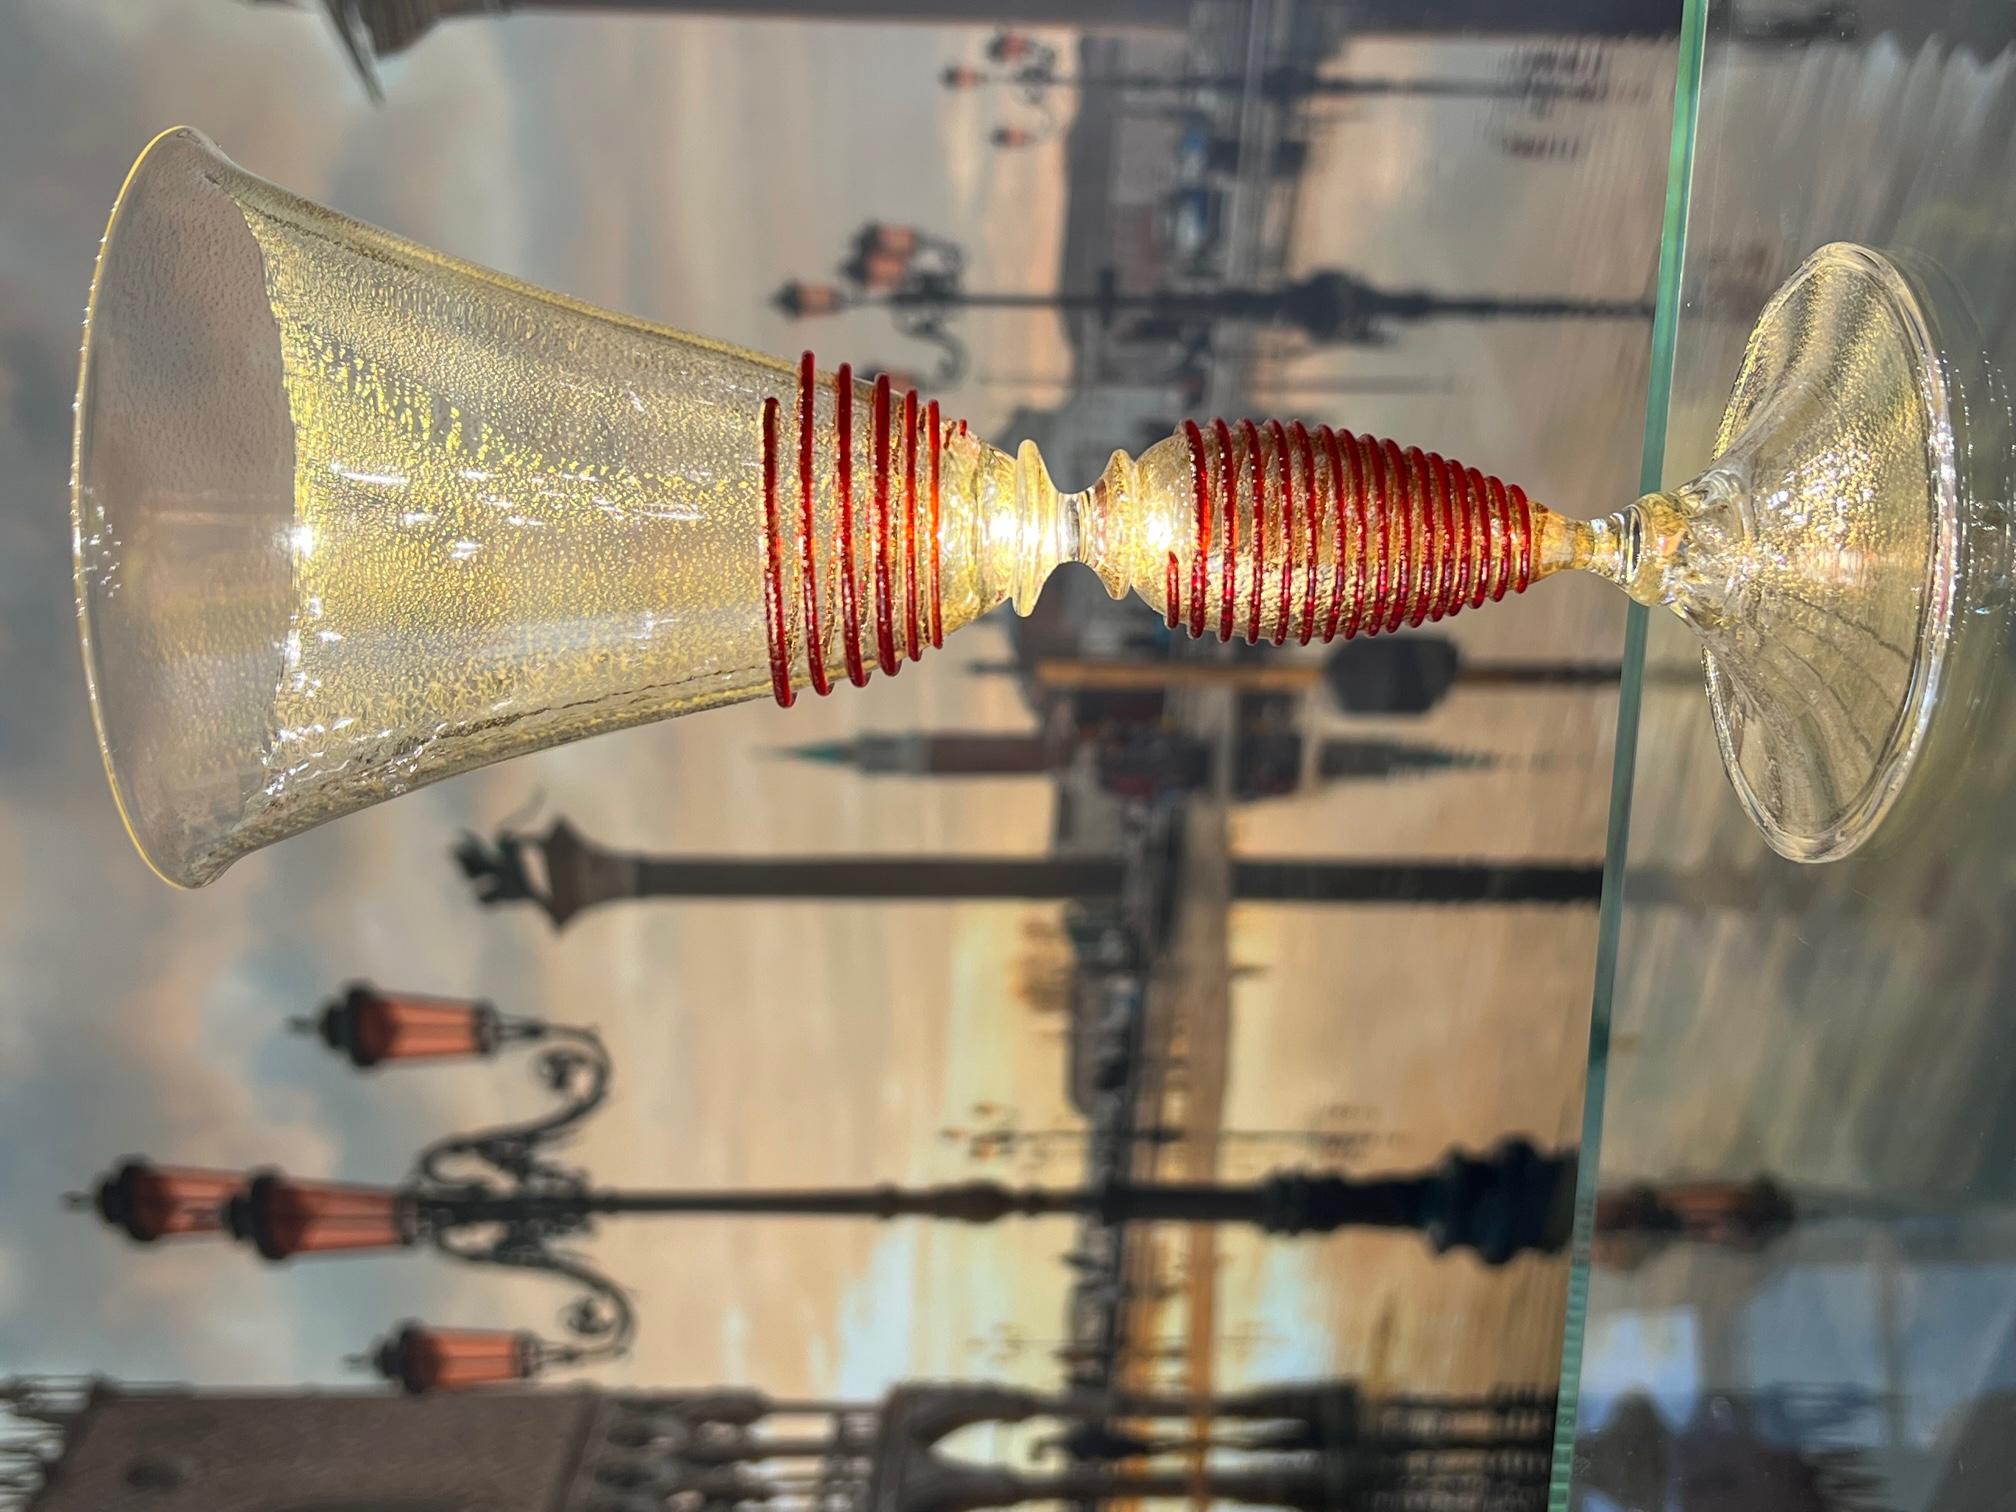 Our aim is the emotion, through glass, lighten by the spirit of art.

1295 MURANO is a furnace, a design lab and an interior point of view
regarding to the most exclusive productions of Murano glass.
Our glass is original, made with the antique